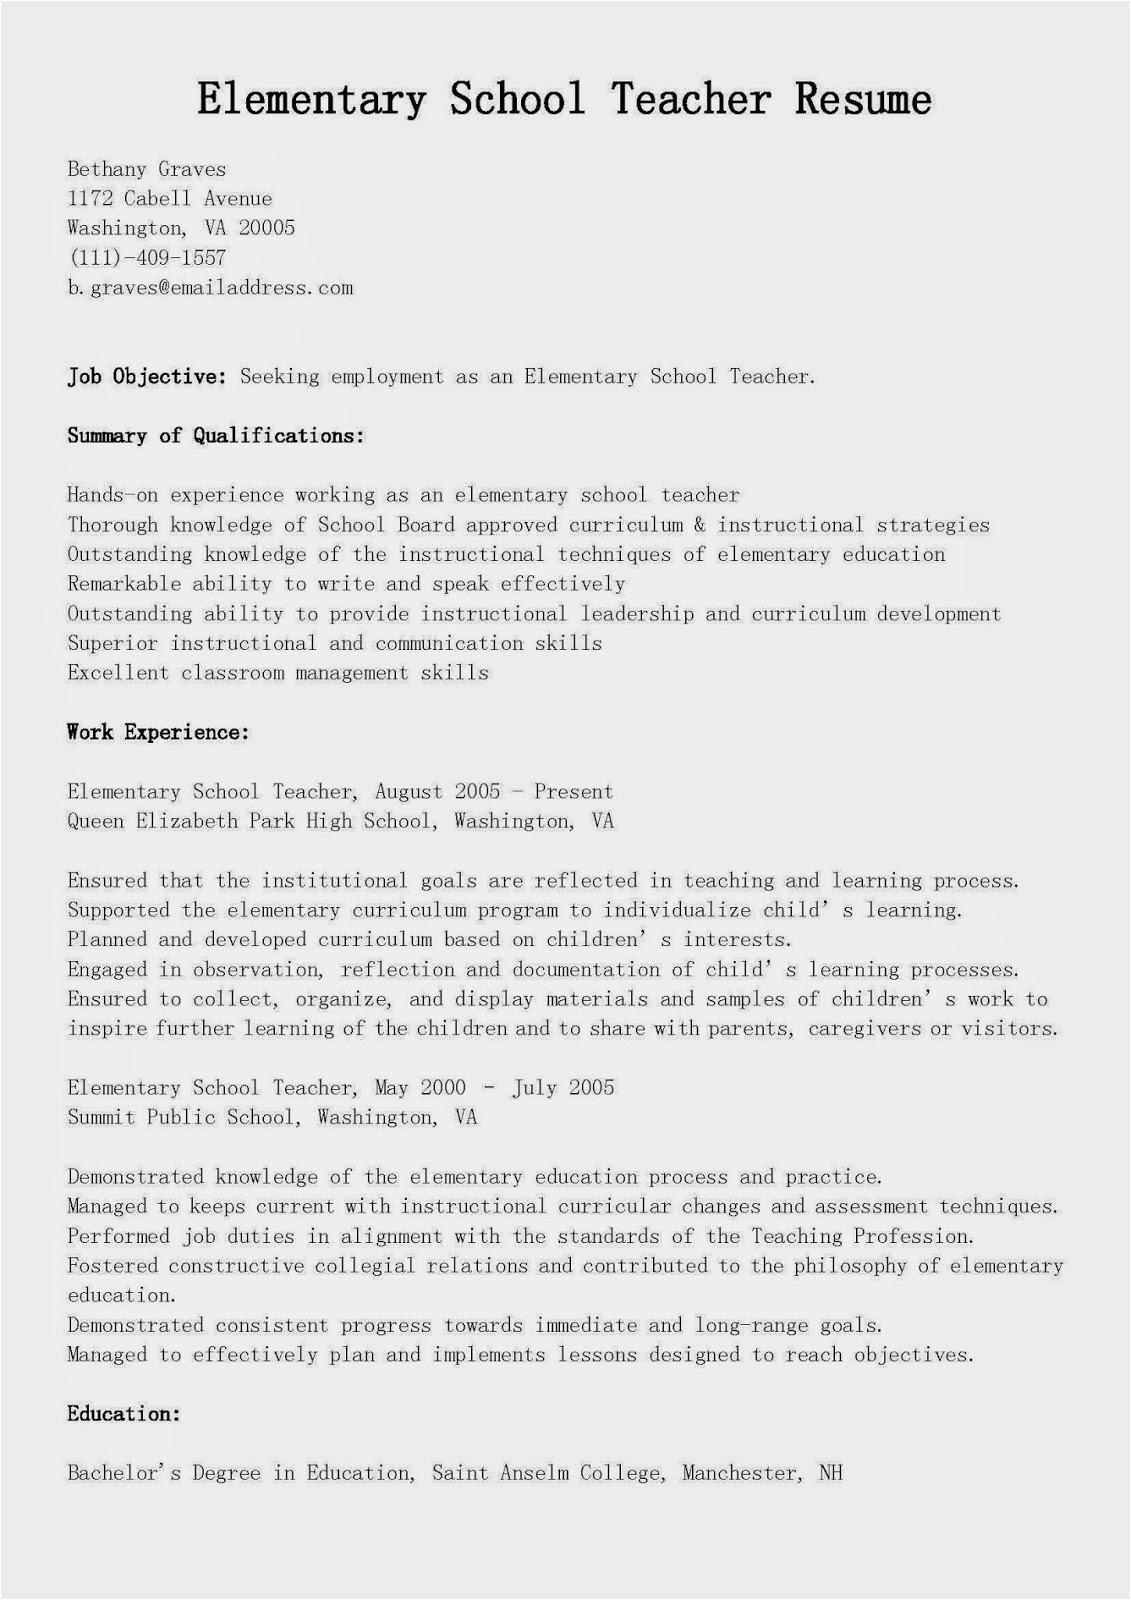 Free Resume Template for Elementary School Teacher Resume Samples Elementary School Teacher Resume Sample